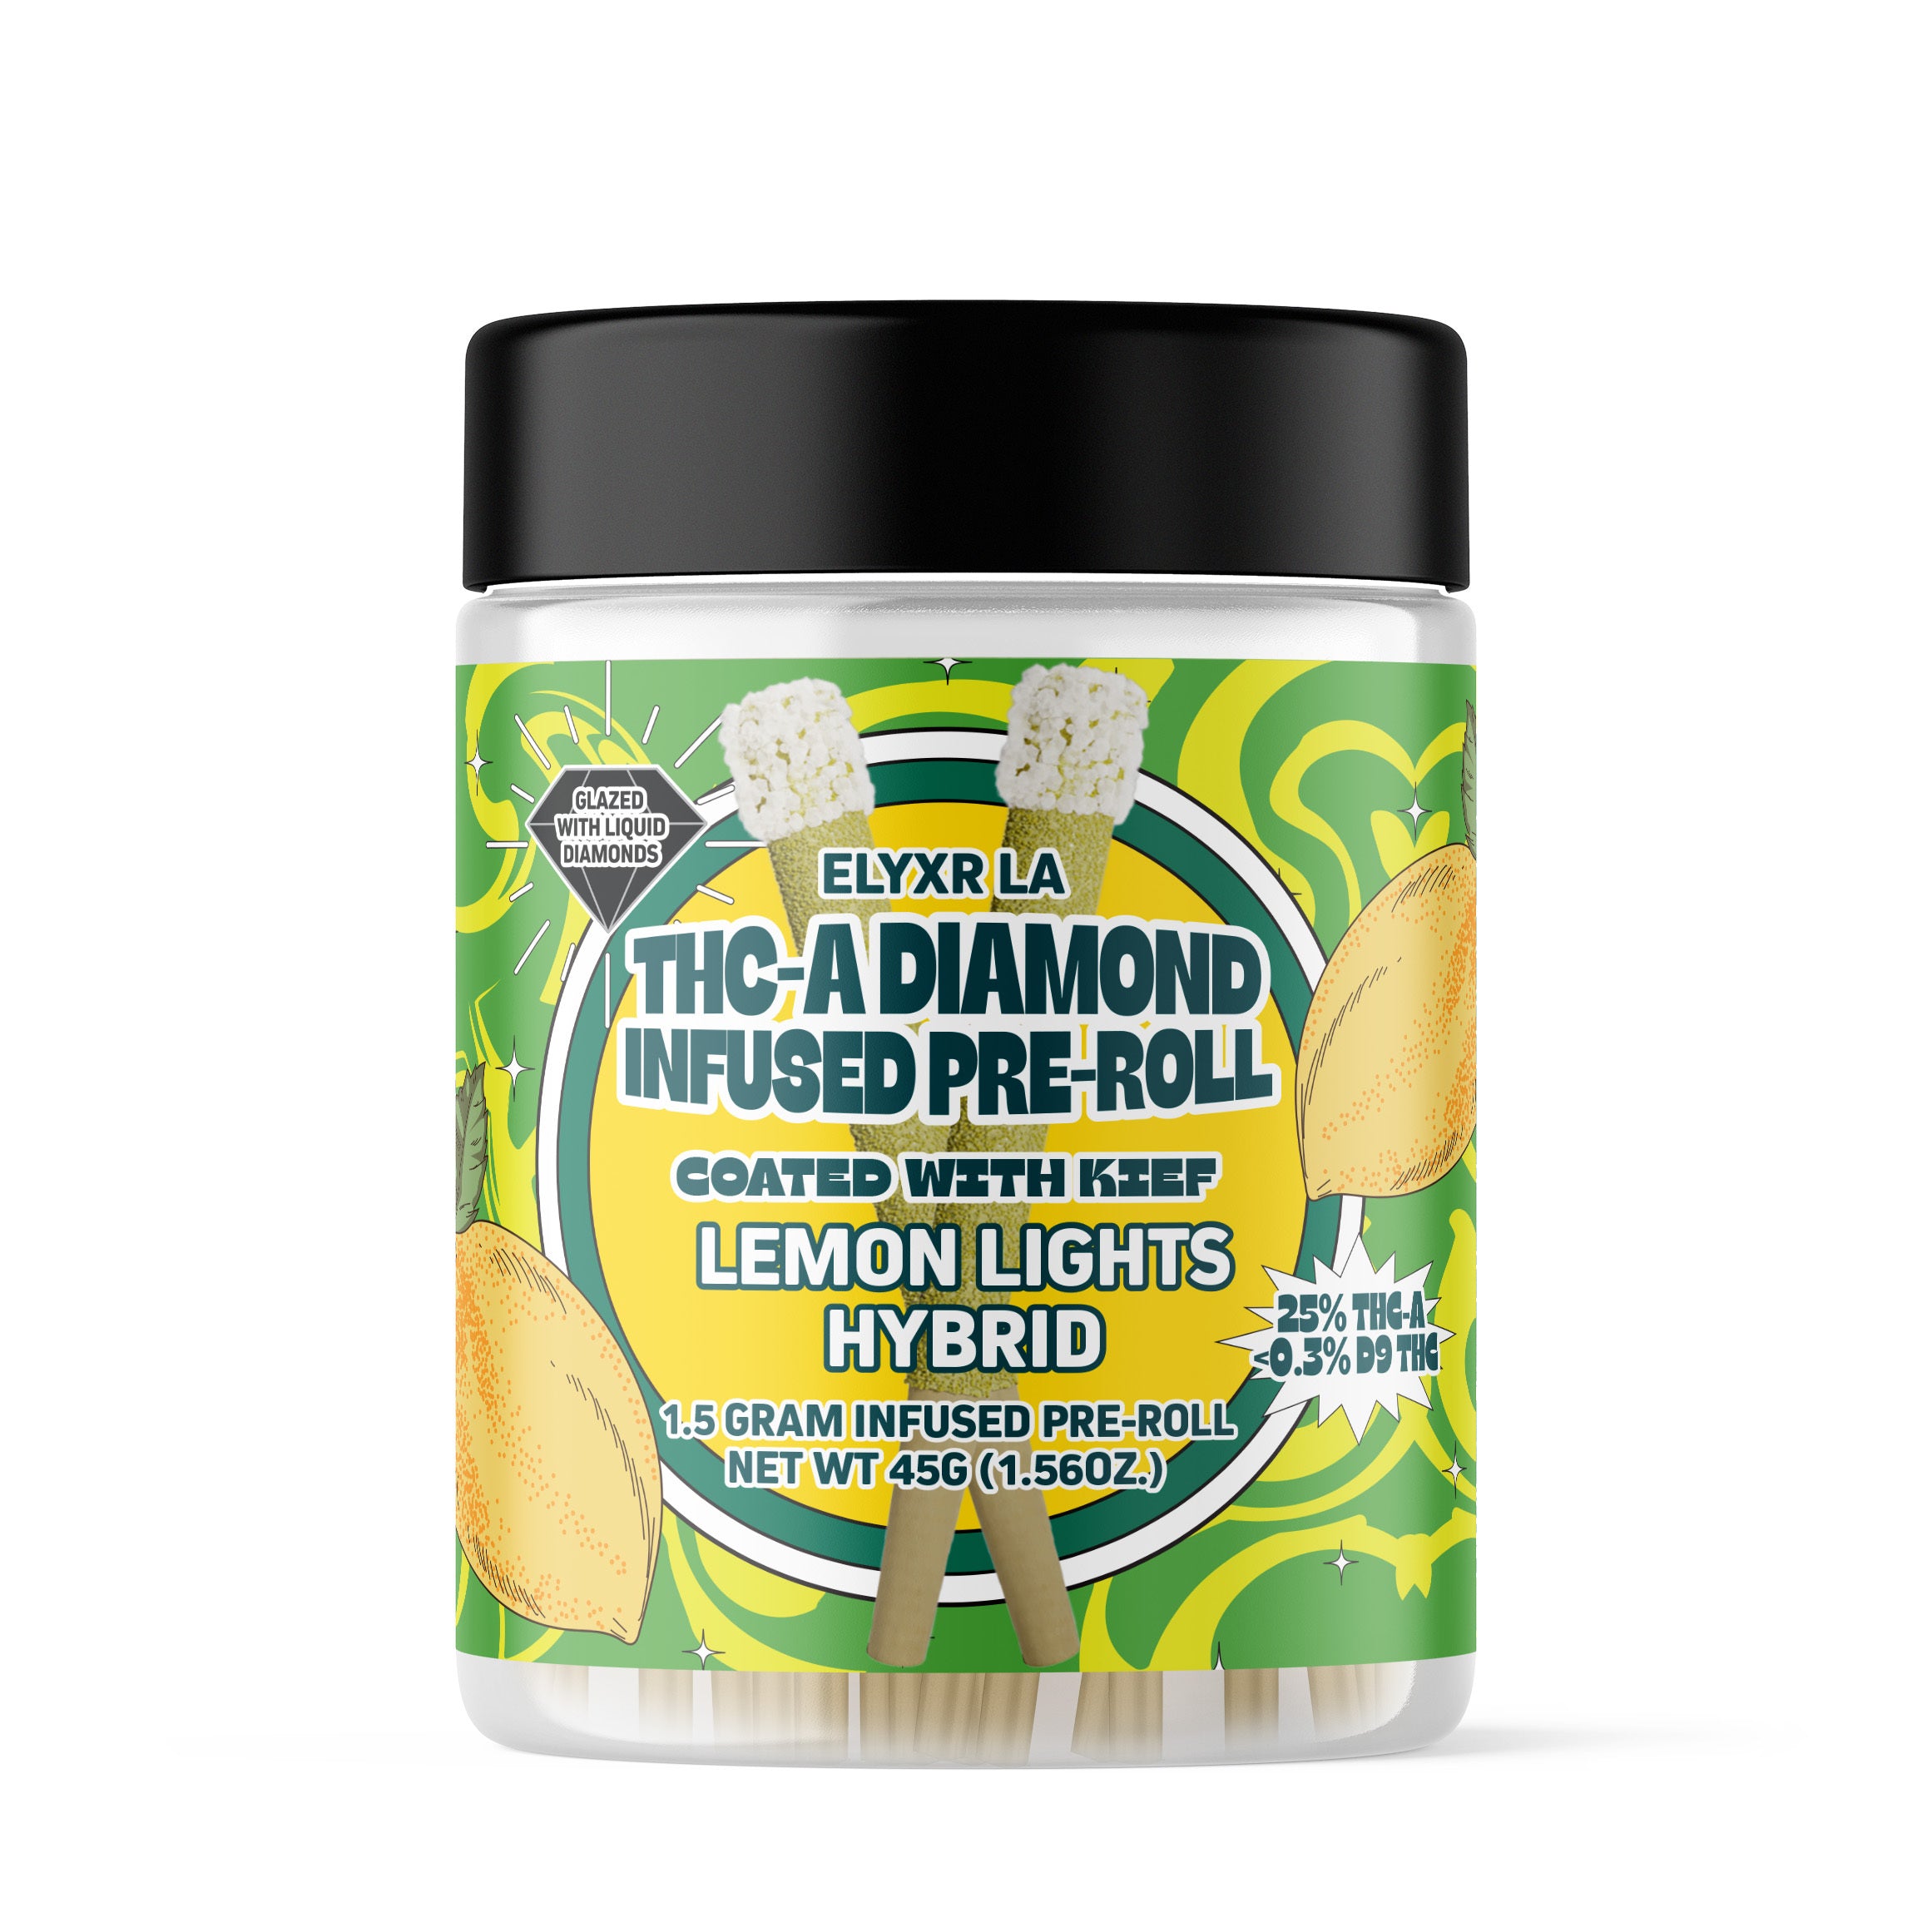 1.5 Gram THC-A Diamond Infused Pre-Rolls (30 Pack)